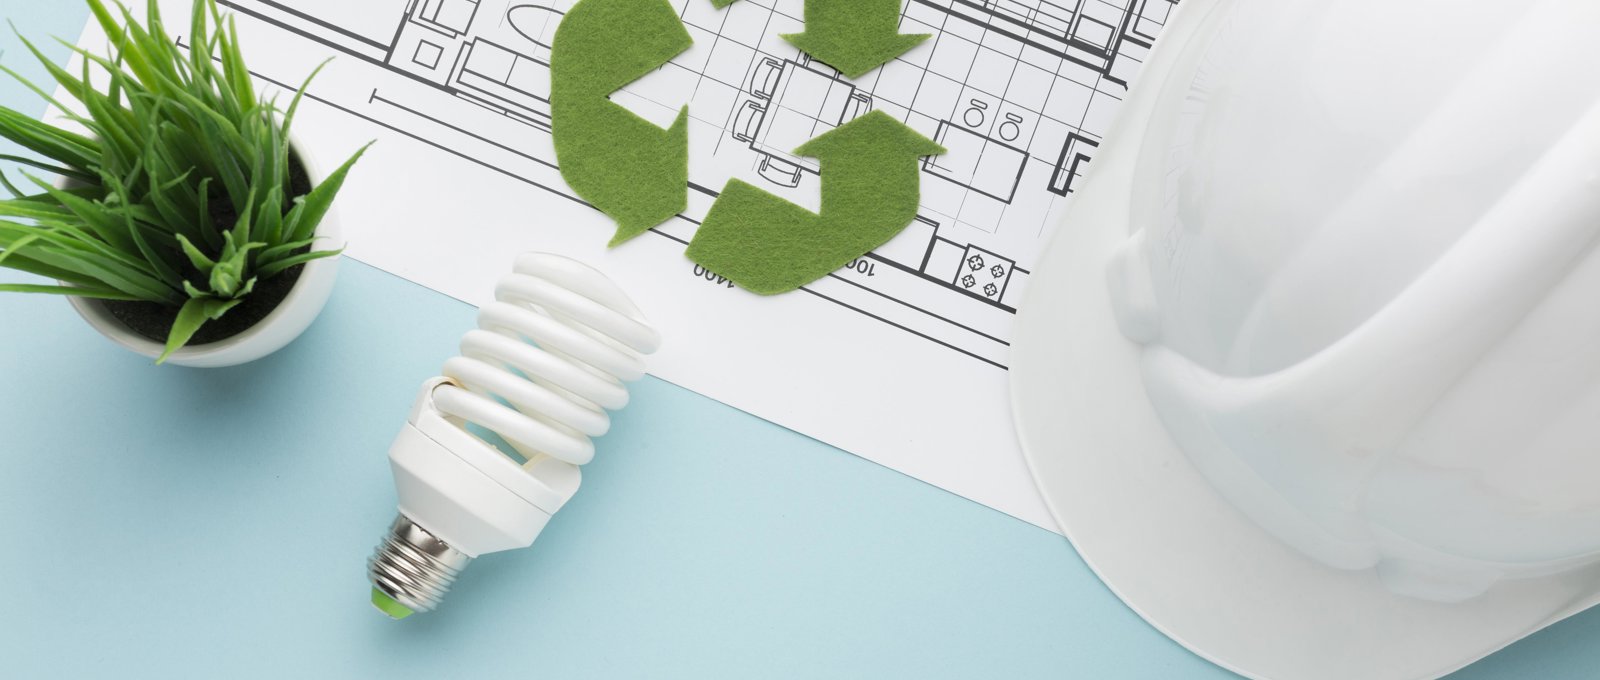 Photo of a white hard hat, a floorplan for a building, a low energy bulb a small plant and a green cut-out recycling symbol lying on a turquoise surface